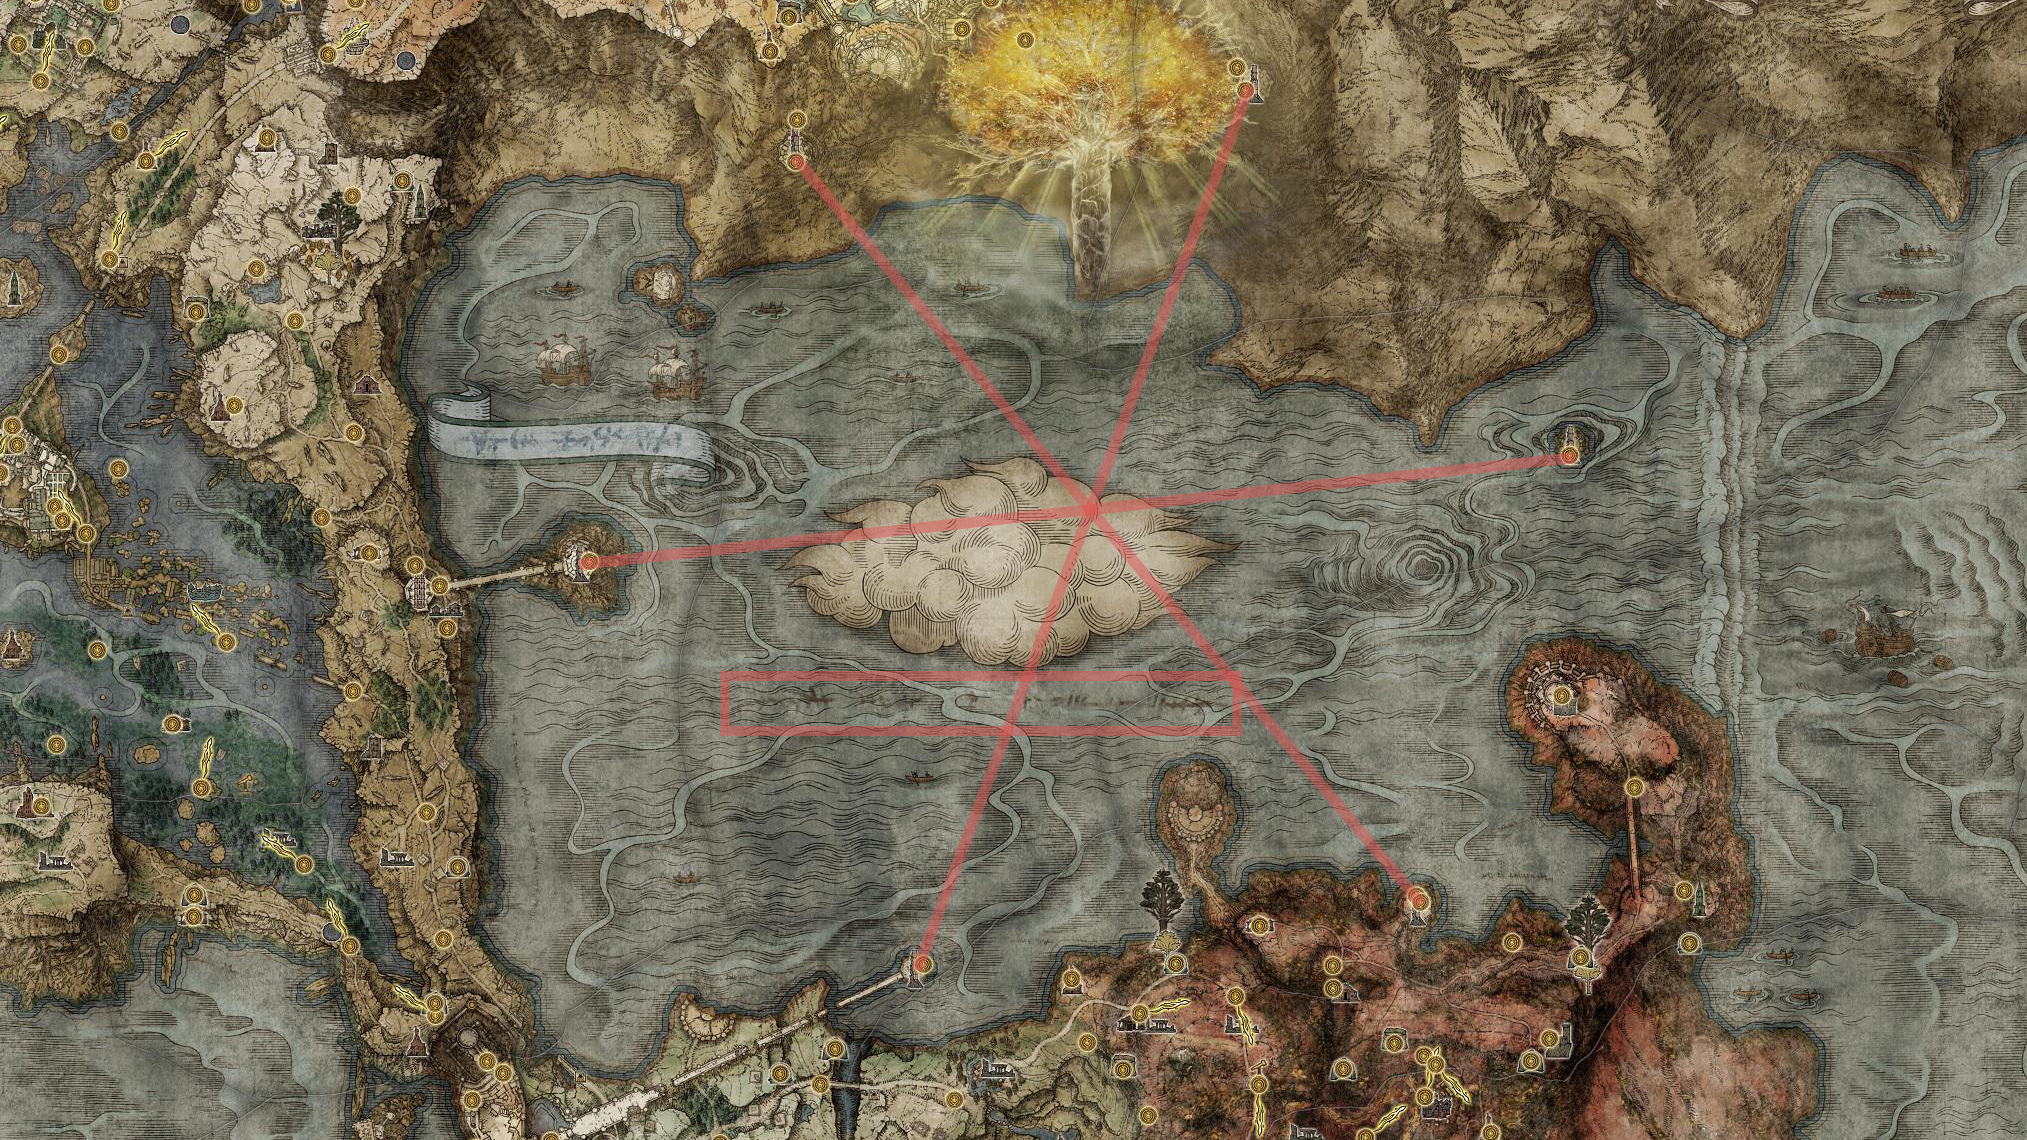 Elden Ring map portion showing potential DLC location